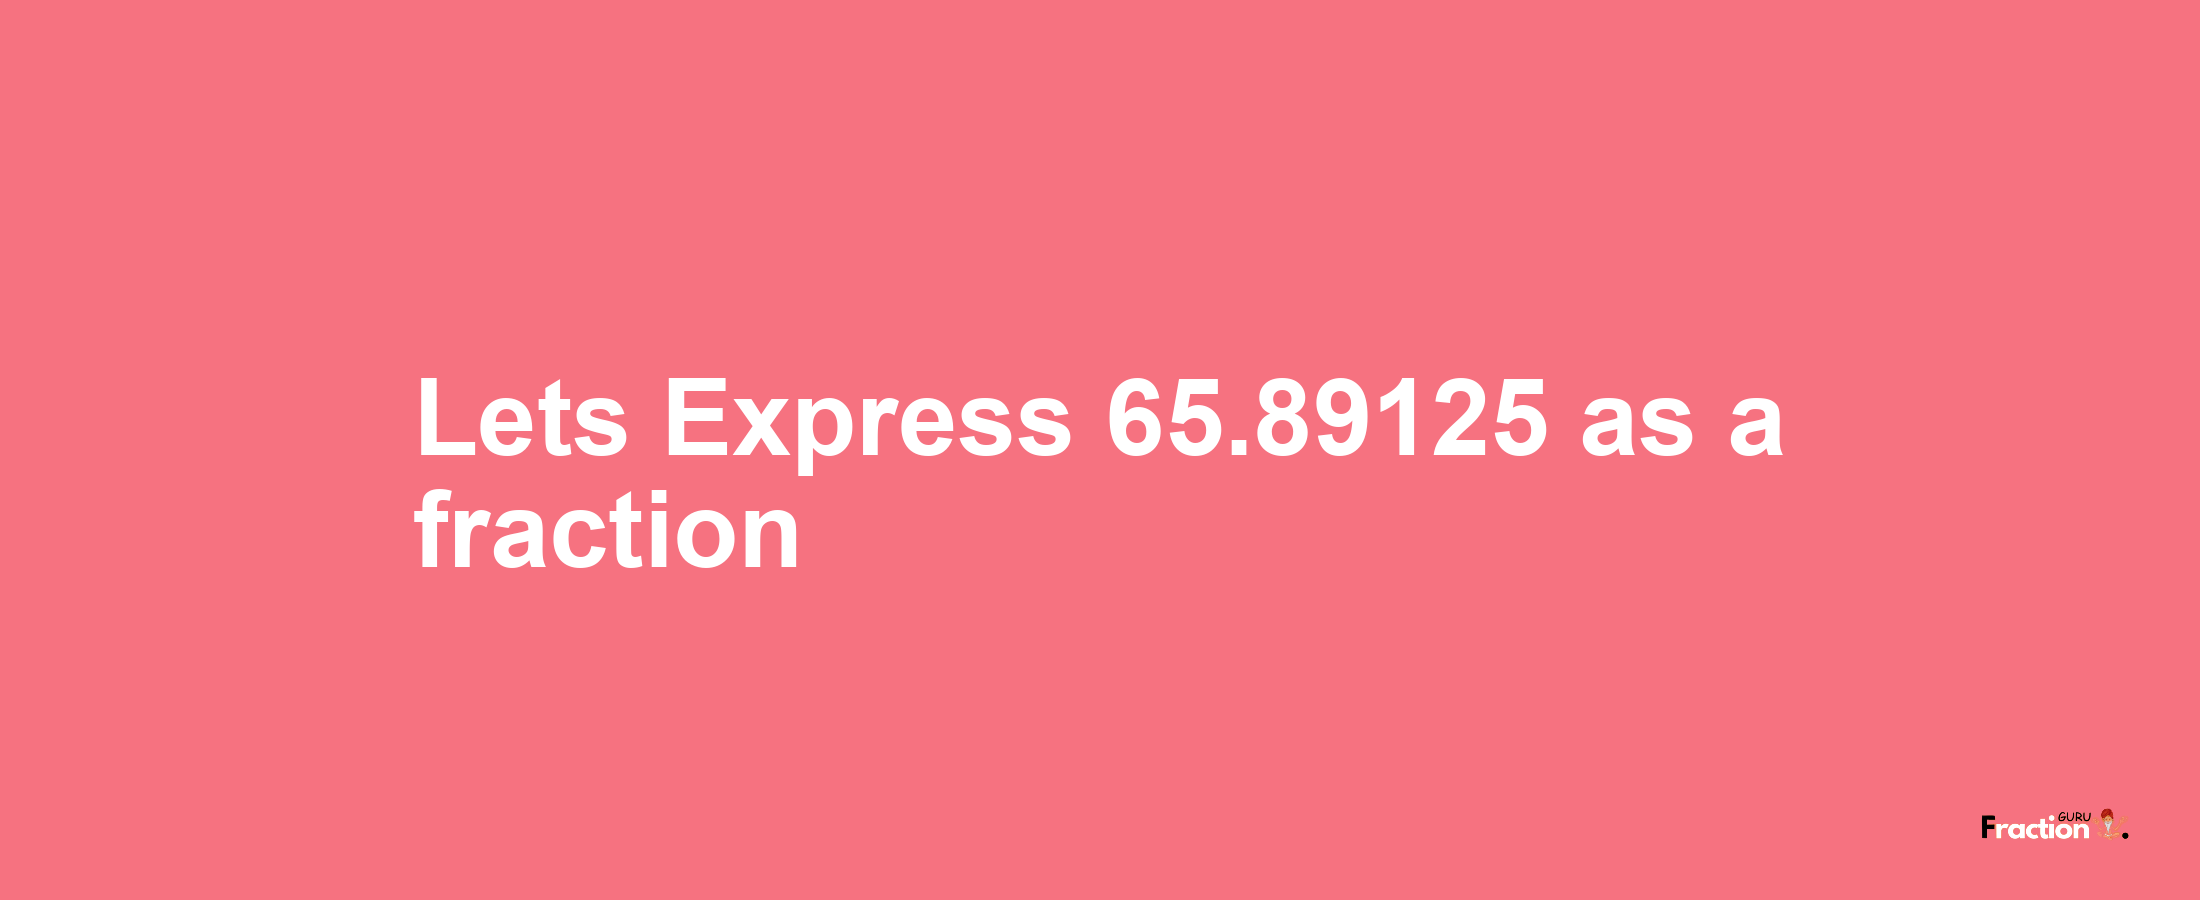 Lets Express 65.89125 as afraction